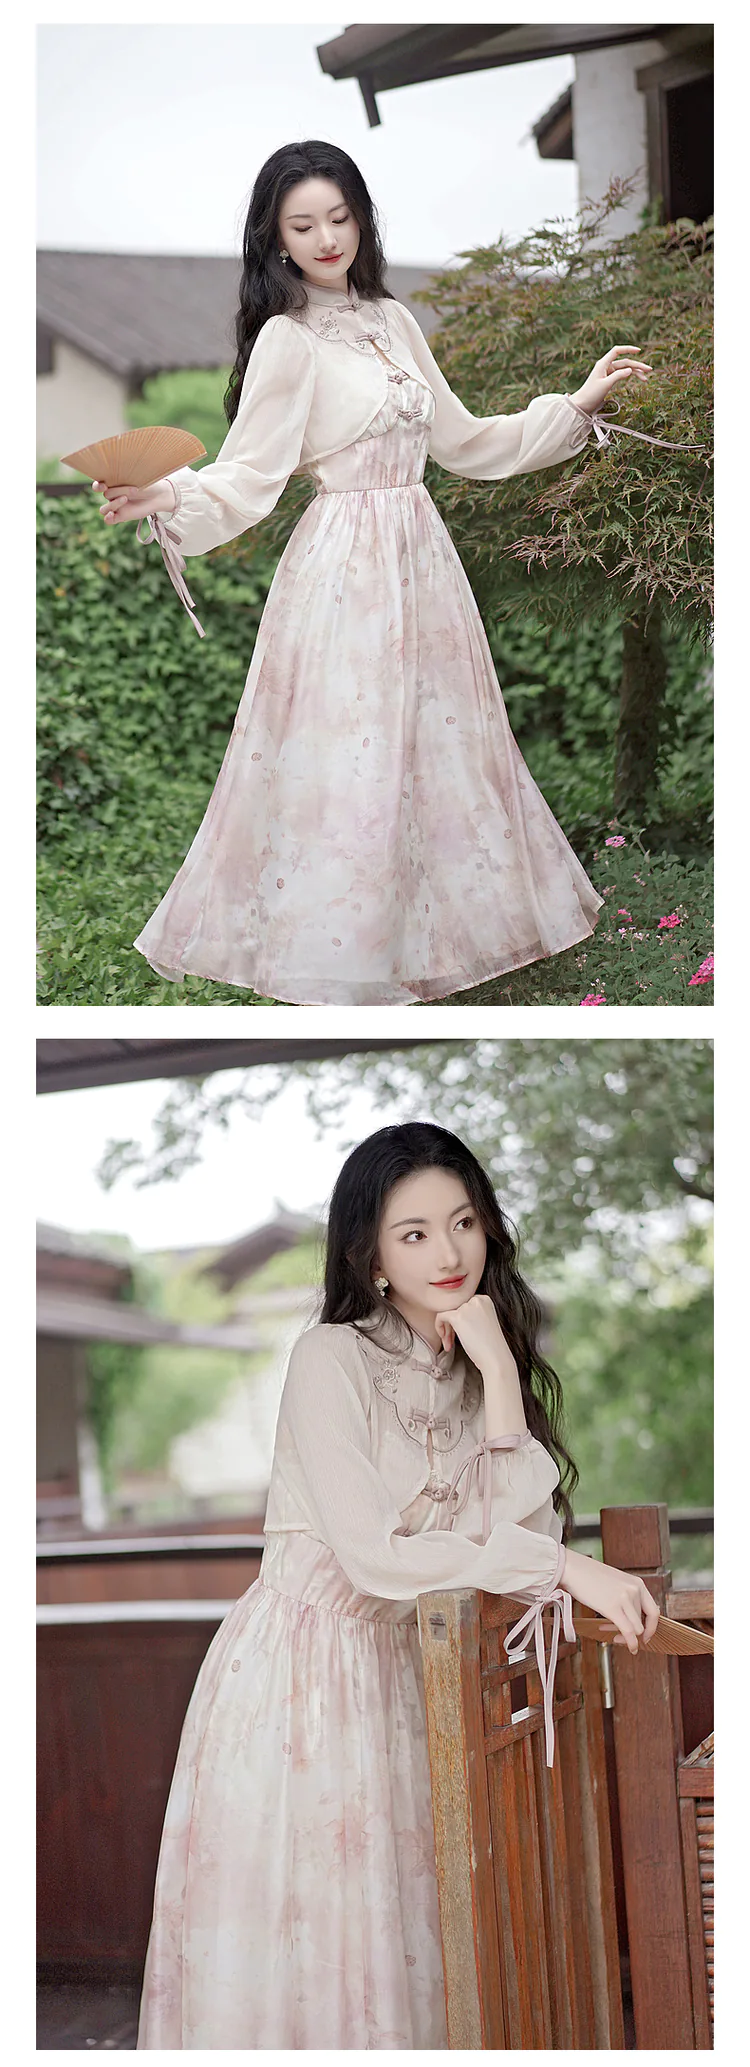 Romantic-Soft-Pink-Floral-Casual-Dress-with-Chiffon-Sun-Protection-Top14